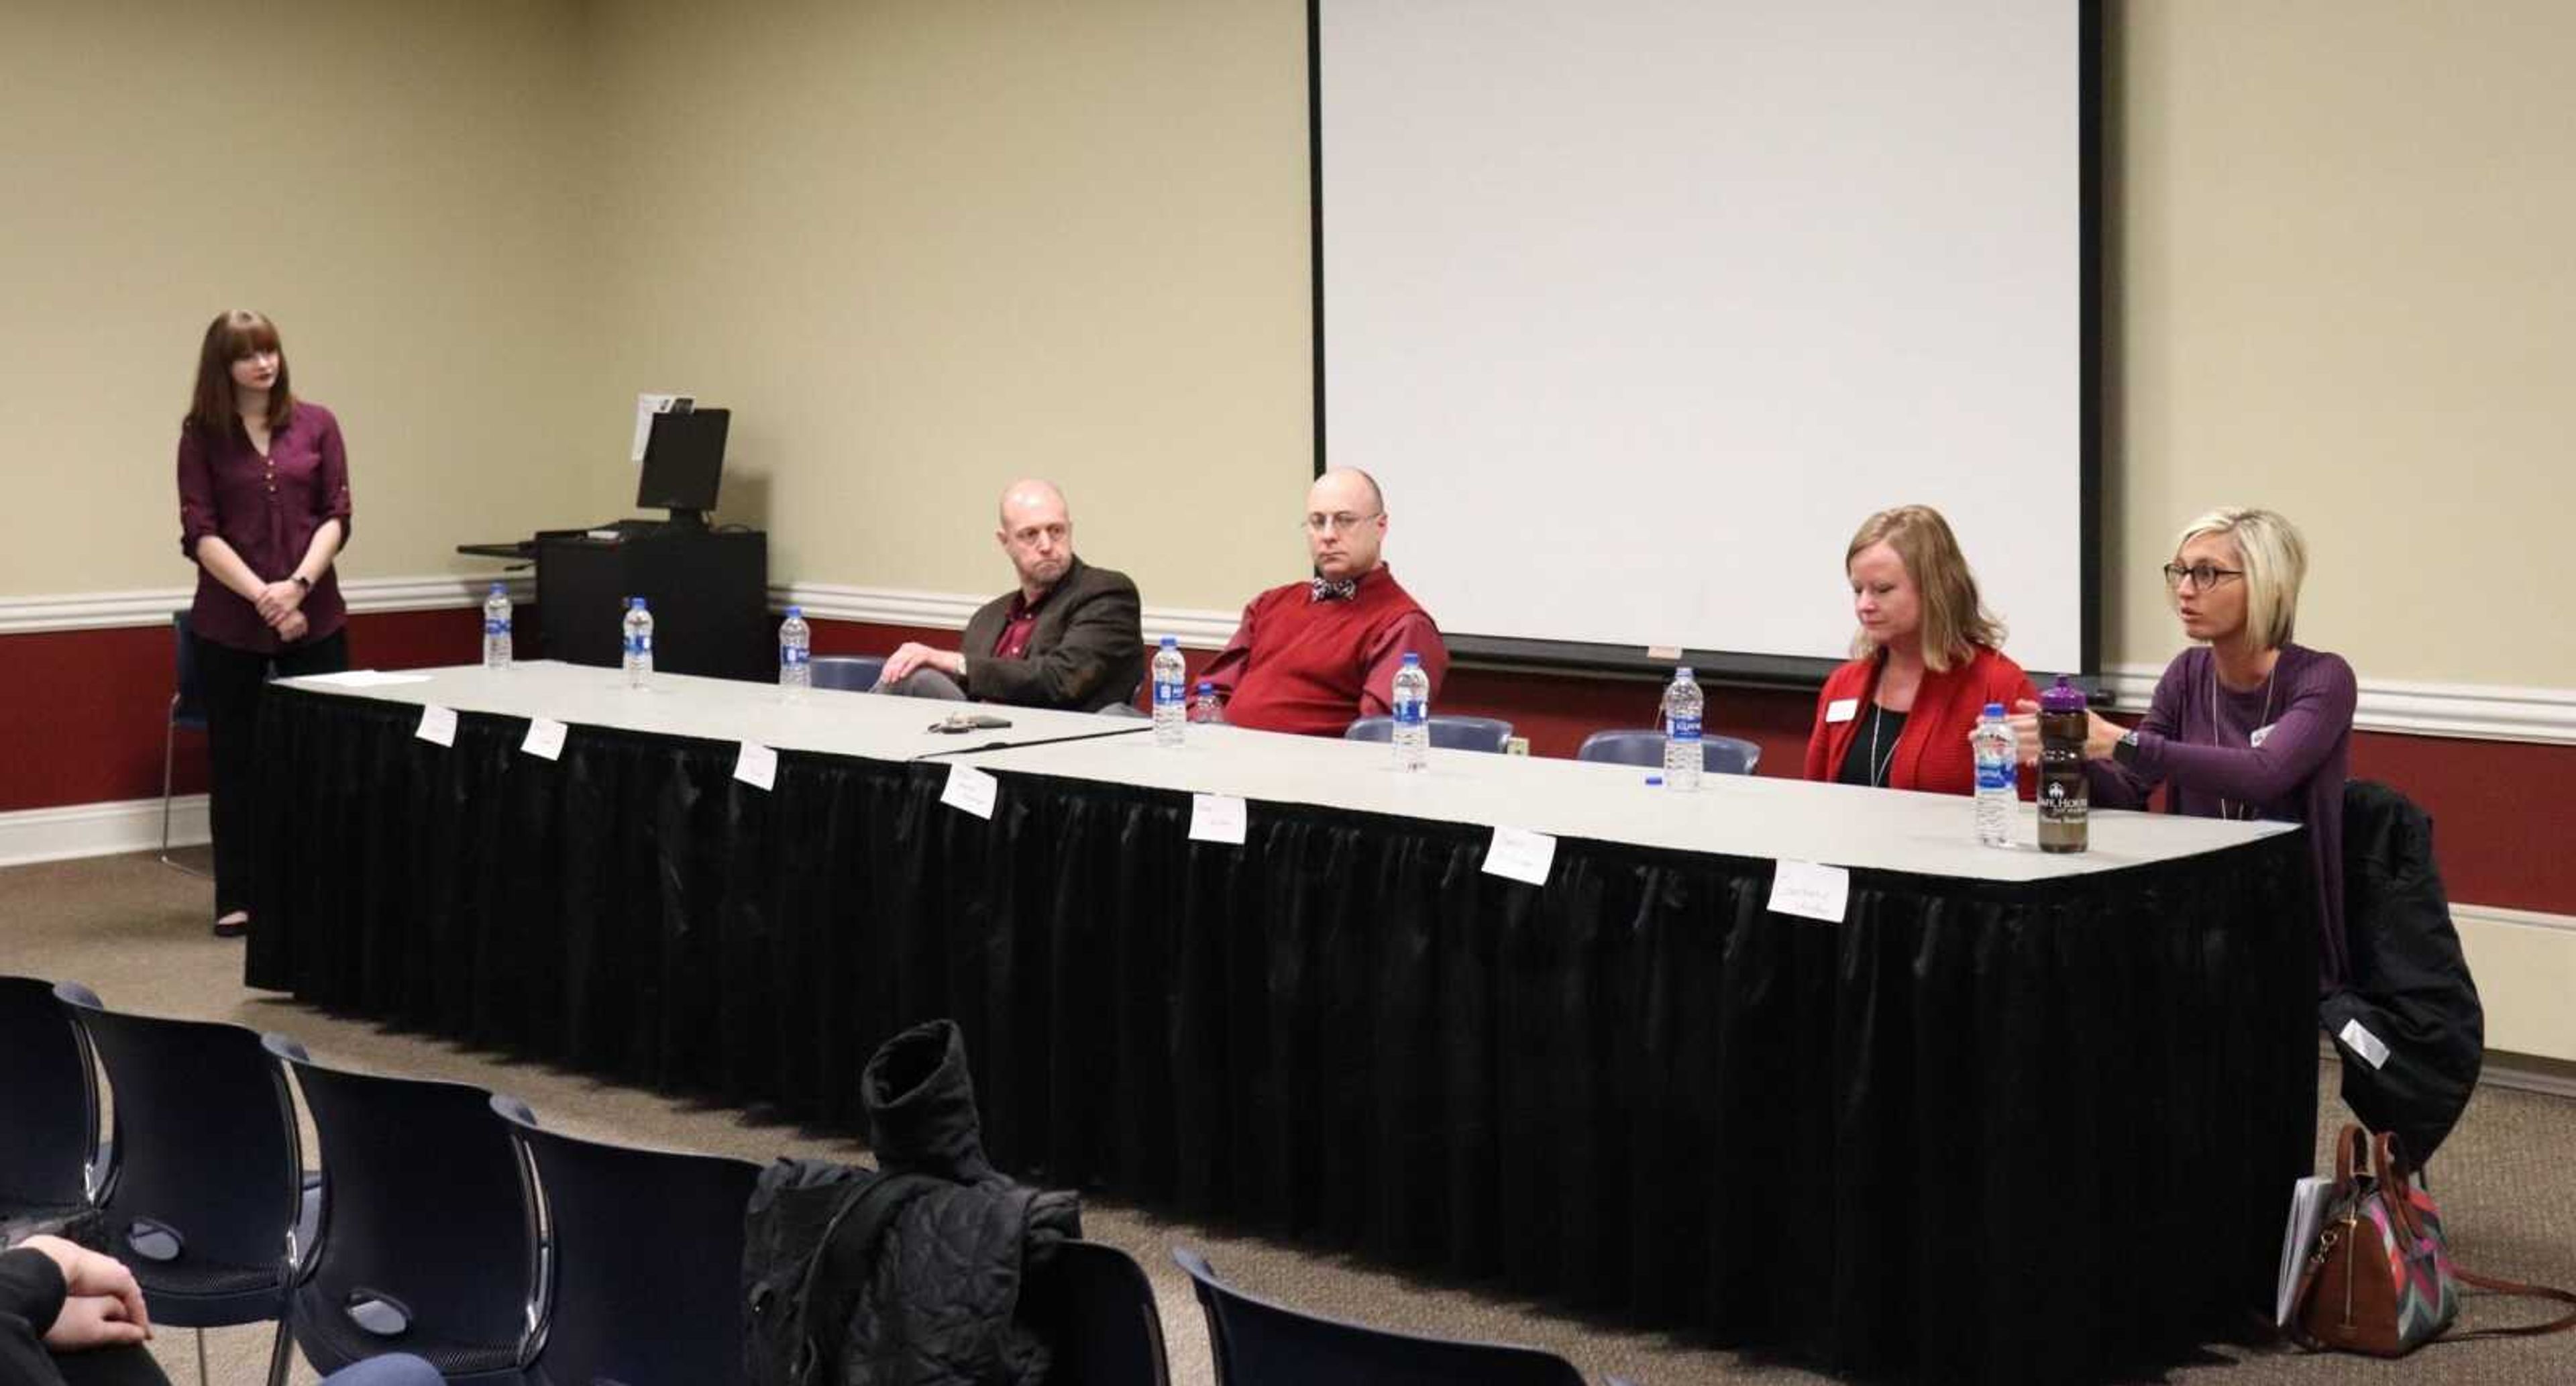 Jessica Strunk (far left) moderates the sexual assault panel on Monday in the university center. From left to right, the panelists are Randy Carter, Bruce Skinner, Donna St. Sauver, and Courtanie Vaughn.